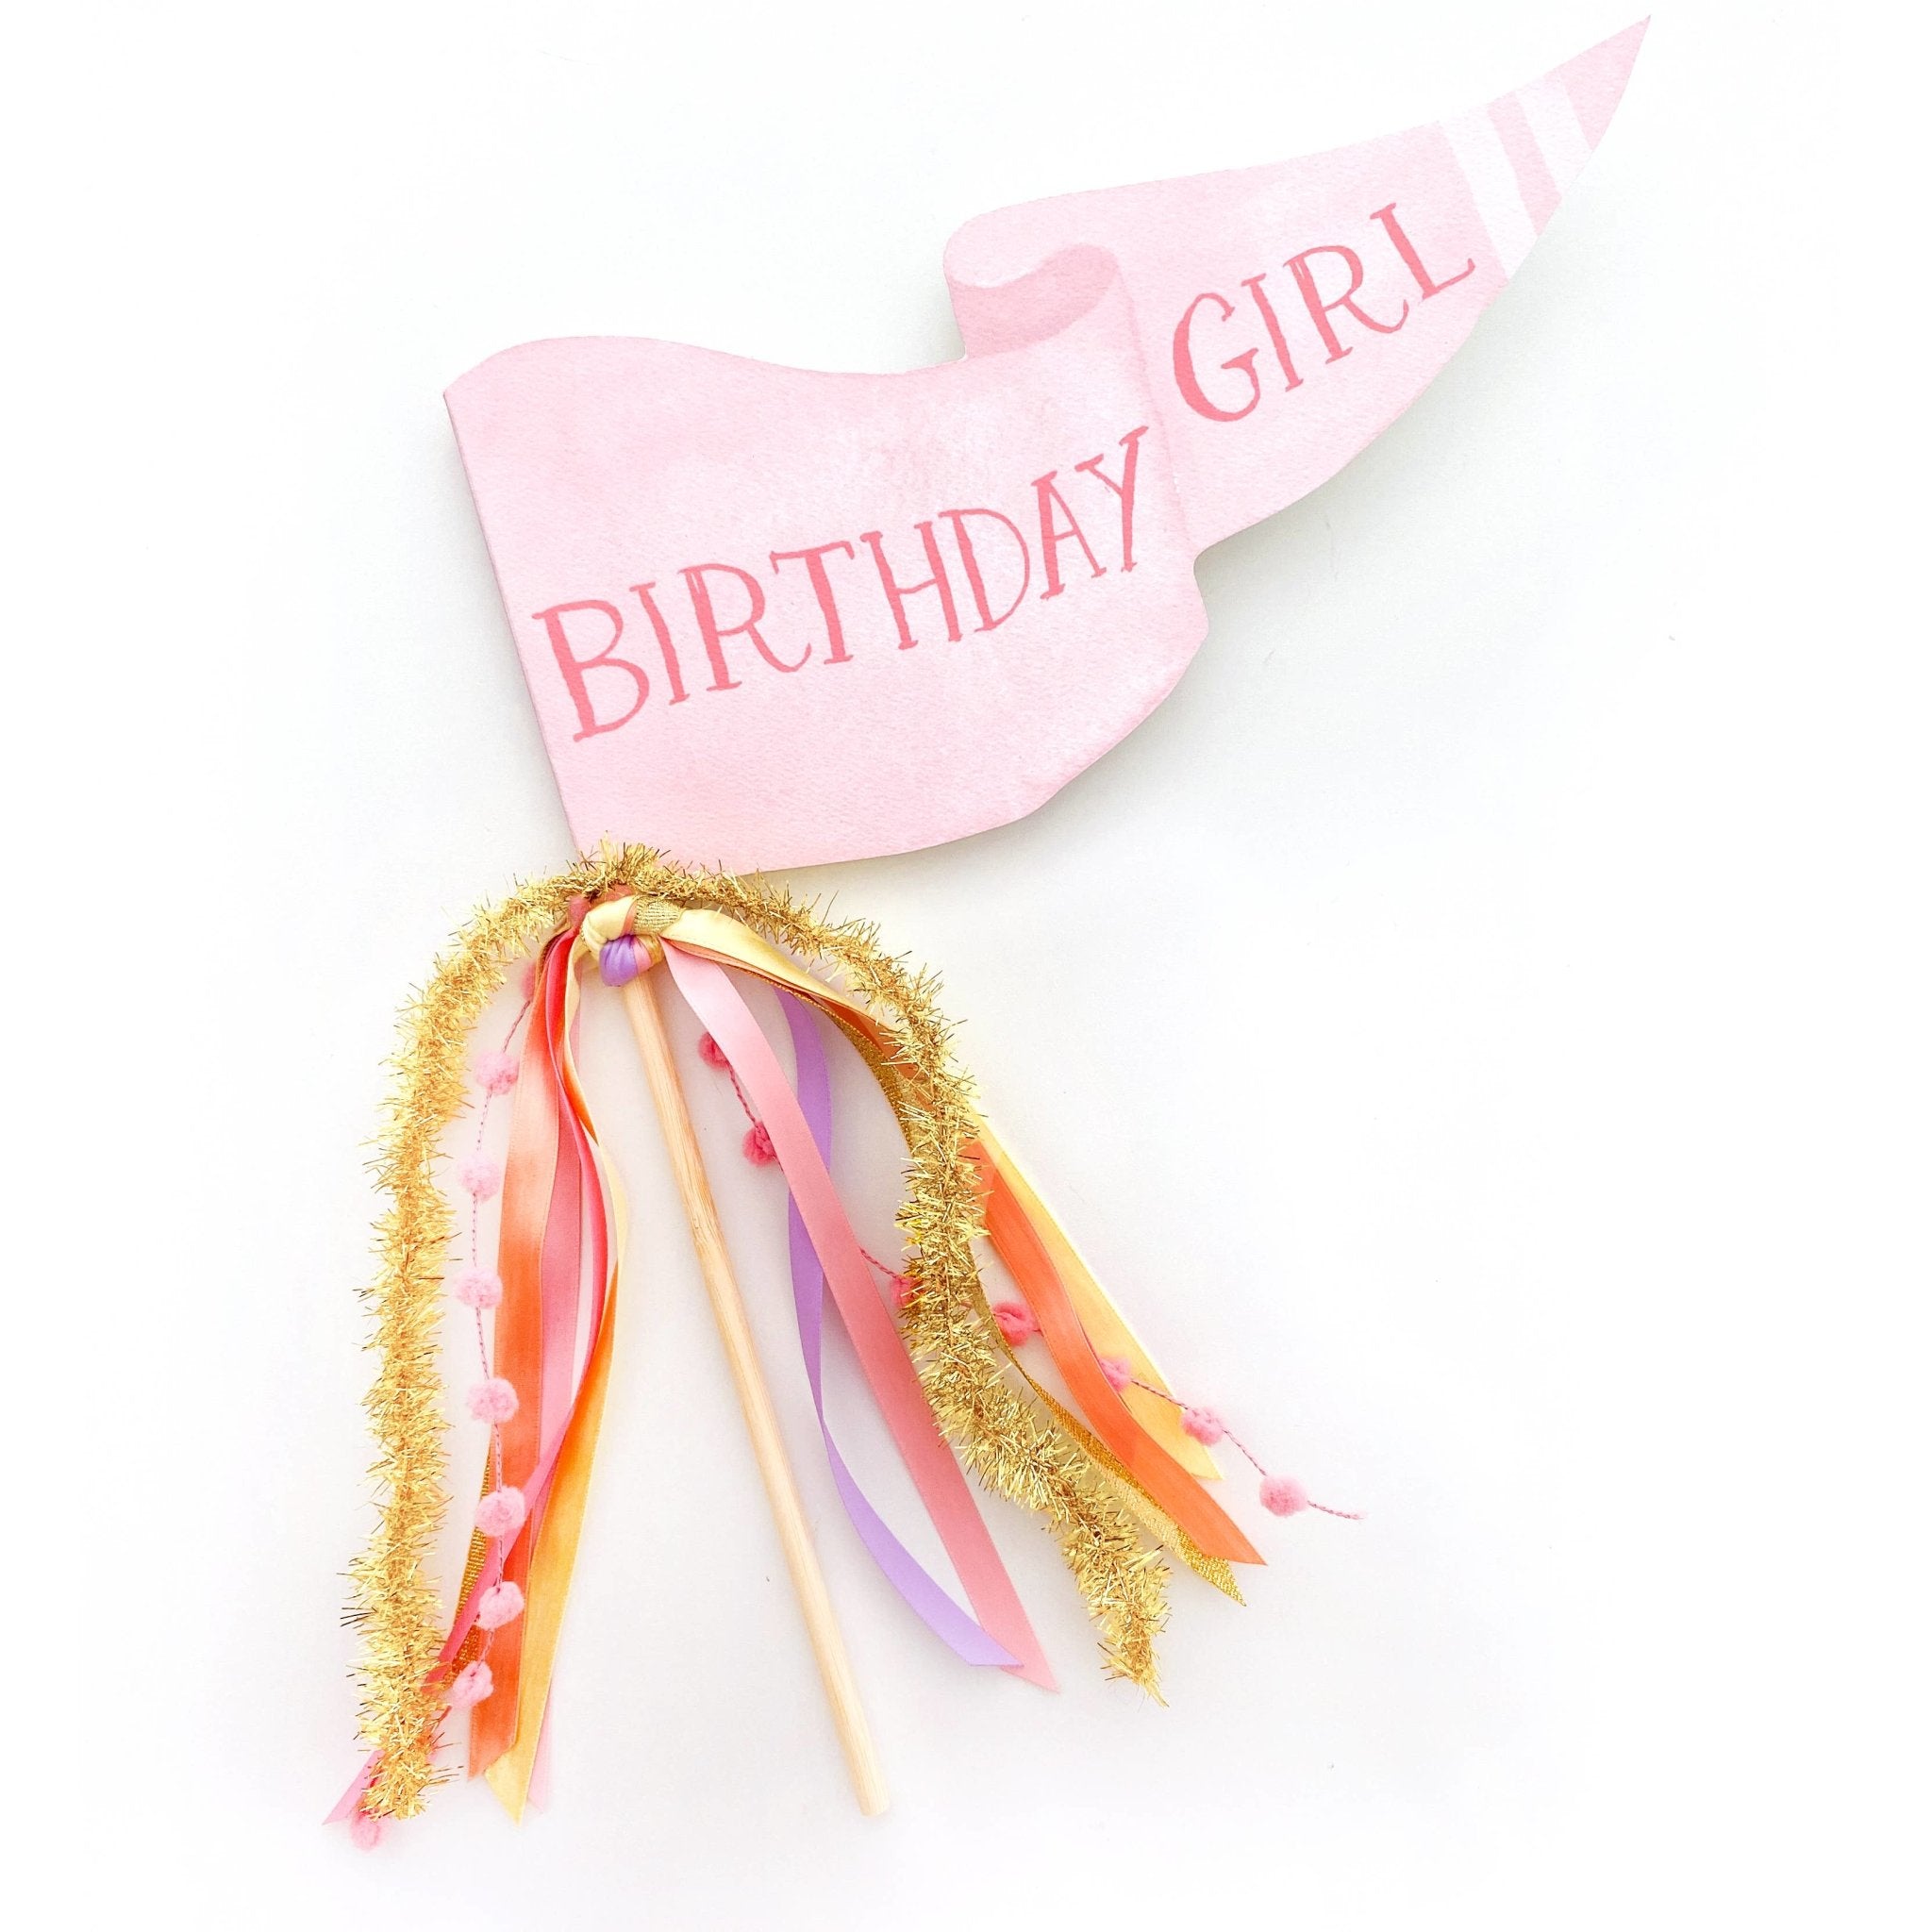 Birthday Girl Party Pennant - Oh My Darling Party Co-birthday giftbirthday girlcami monet #Fringe_Backdrop#